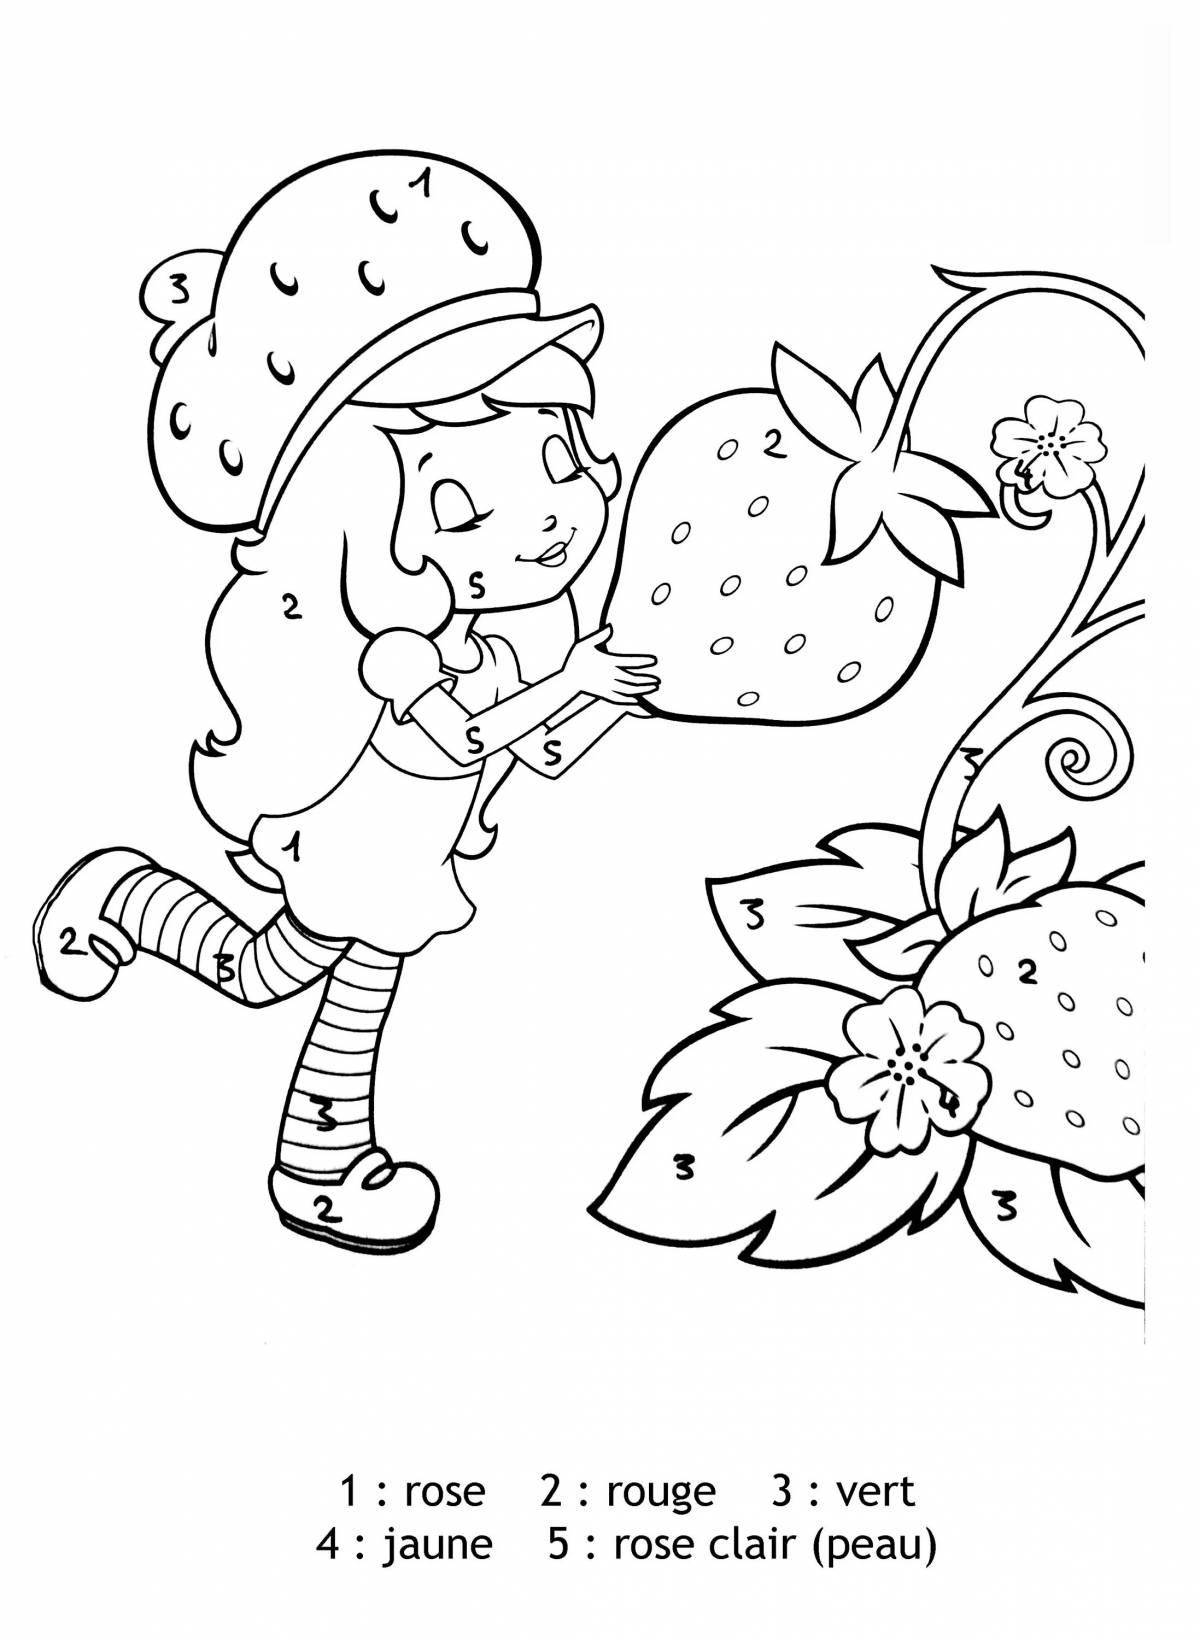 Coloring pages for girls with colorful berries